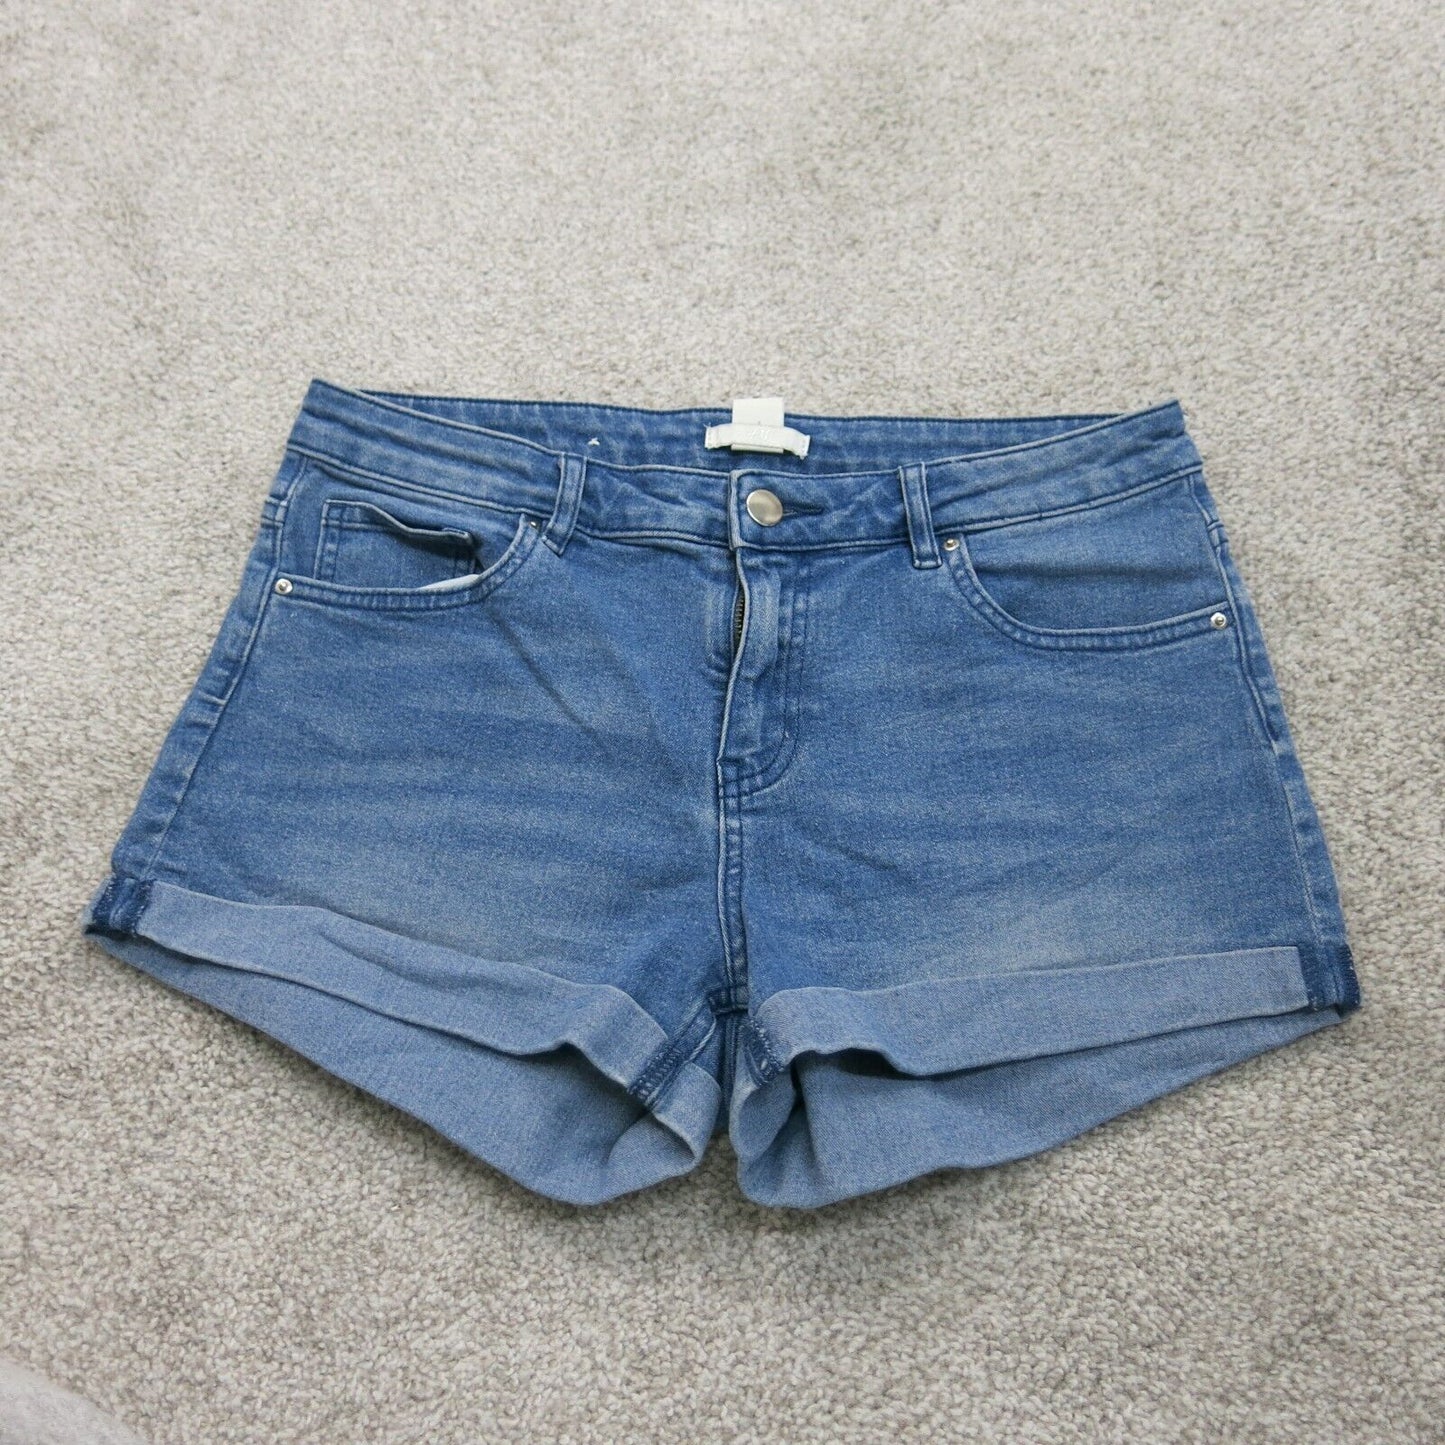 H & M Womens Roll Tab Jeans Shorts Mid Rise Flat Front Pockets Blue Size 8